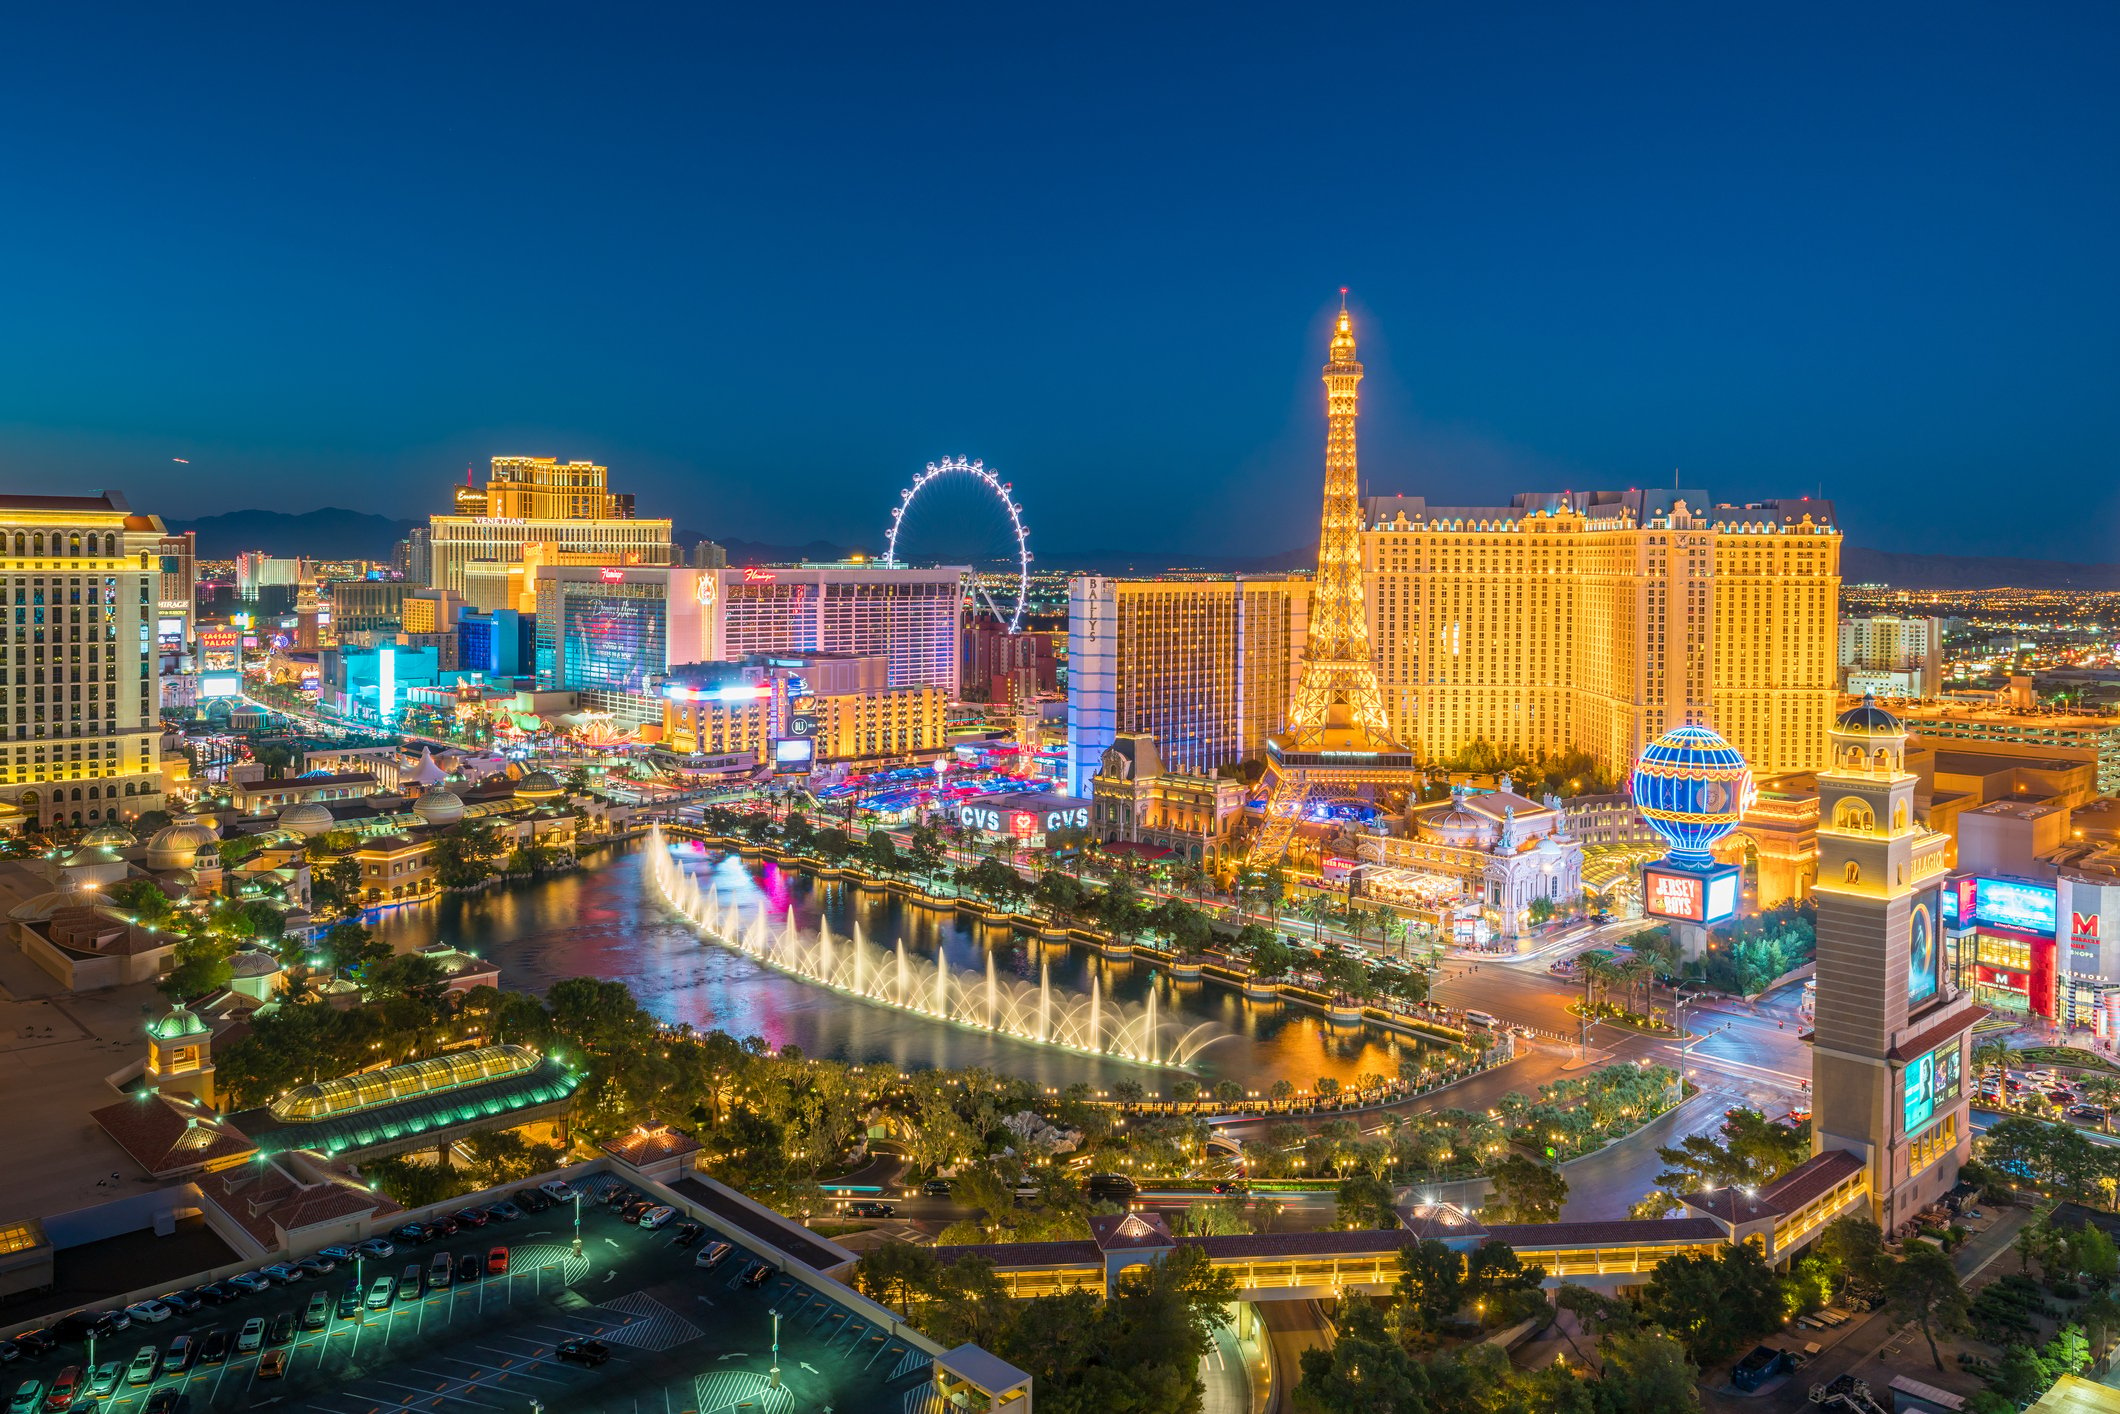 Welcome to Las Vegas is one of the best places to shop in Las Vegas